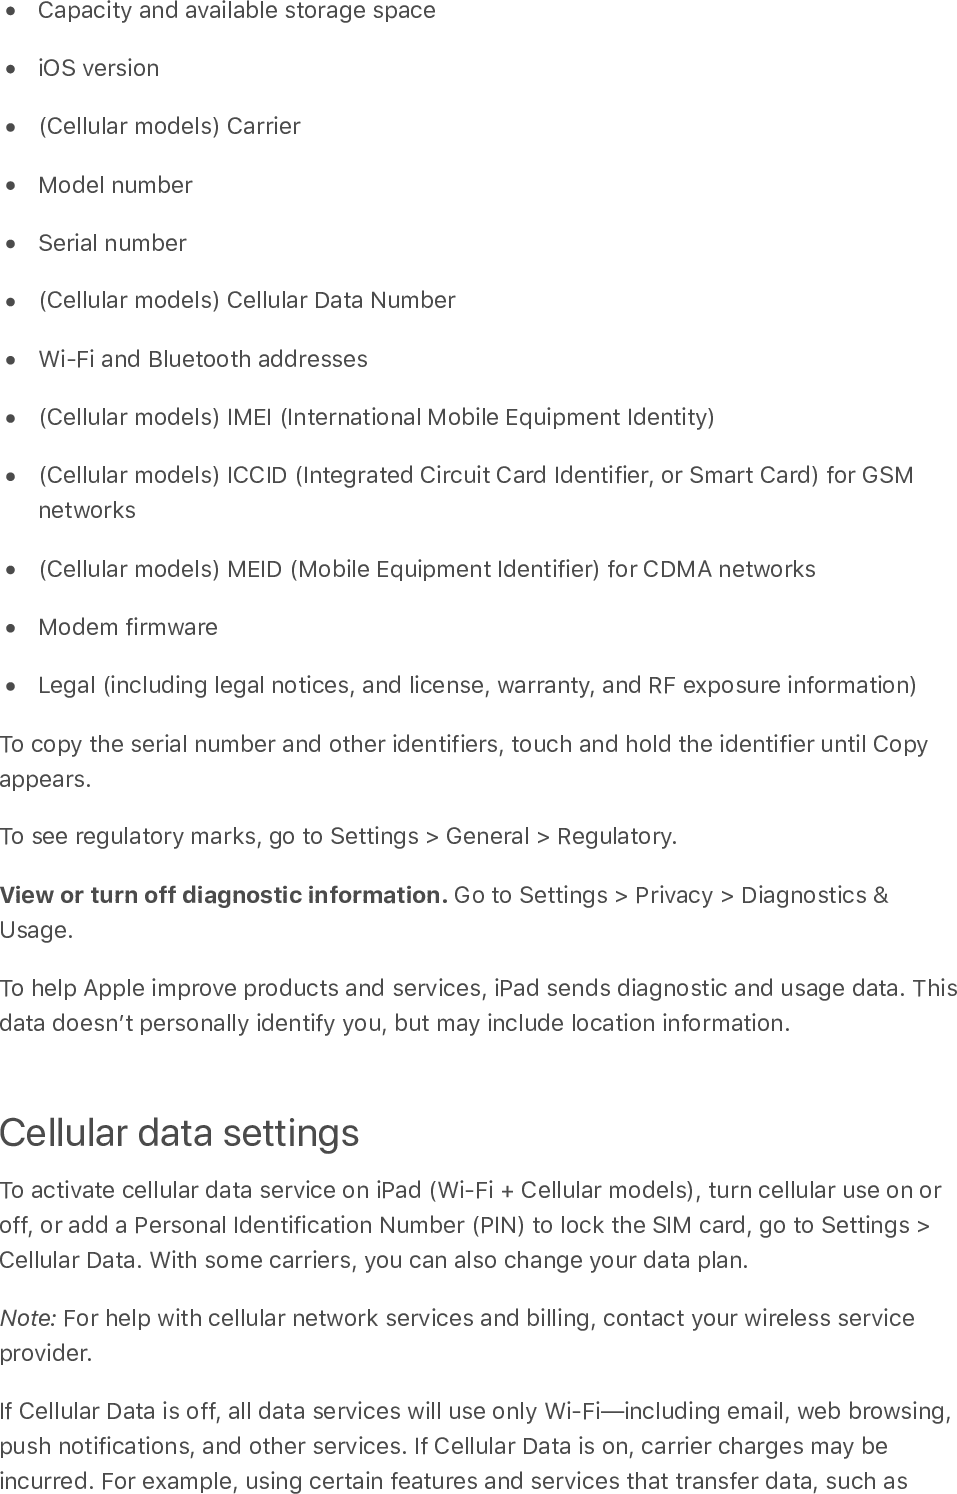 Capacity and available storage spaceiOS version(Cellular models) CarrierModel numberSerial number(Cellular models) Cellular Data NumberWi-Fi and Bluetooth addresses(Cellular models) IMEI (International Mobile Equipment Identity)(Cellular models) ICCID (Integrated Circuit Card Identifier, or Smart Card) for GSMnetworks(Cellular models) MEID (Mobile Equipment Identifier) for CDMA networksModem firmwareLegal (including legal notices, and license, warranty, and RF exposure information)To copy the serial number and other identifiers, touch and hold the identifier until Copyappears.To see regulatory marks, go to Settings &gt; General &gt; Regulatory.View or turn off diagnostic information. Go to Settings &gt; Privacy &gt; Diagnostics &amp;Usage.To help Apple improve products and services, iPad sends diagnostic and usage data. Thisdata doesnʼt personally identify you, but may include location information.Cellular data settingsTo activate cellular data service on iPad (Wi-Fi + Cellular models), turn cellular use on oroff, or add a Personal Identification Number (PIN) to lock the SIM card, go to Settings &gt;Cellular Data. With some carriers, you can also change your data plan.Note: For help with cellular network services and billing, contact your wireless serviceprovider.If Cellular Data is off, all data services will use only Wi-Fi—including email, web browsing,push notifications, and other services. If Cellular Data is on, carrier charges may beincurred. For example, using certain features and services that transfer data, such as